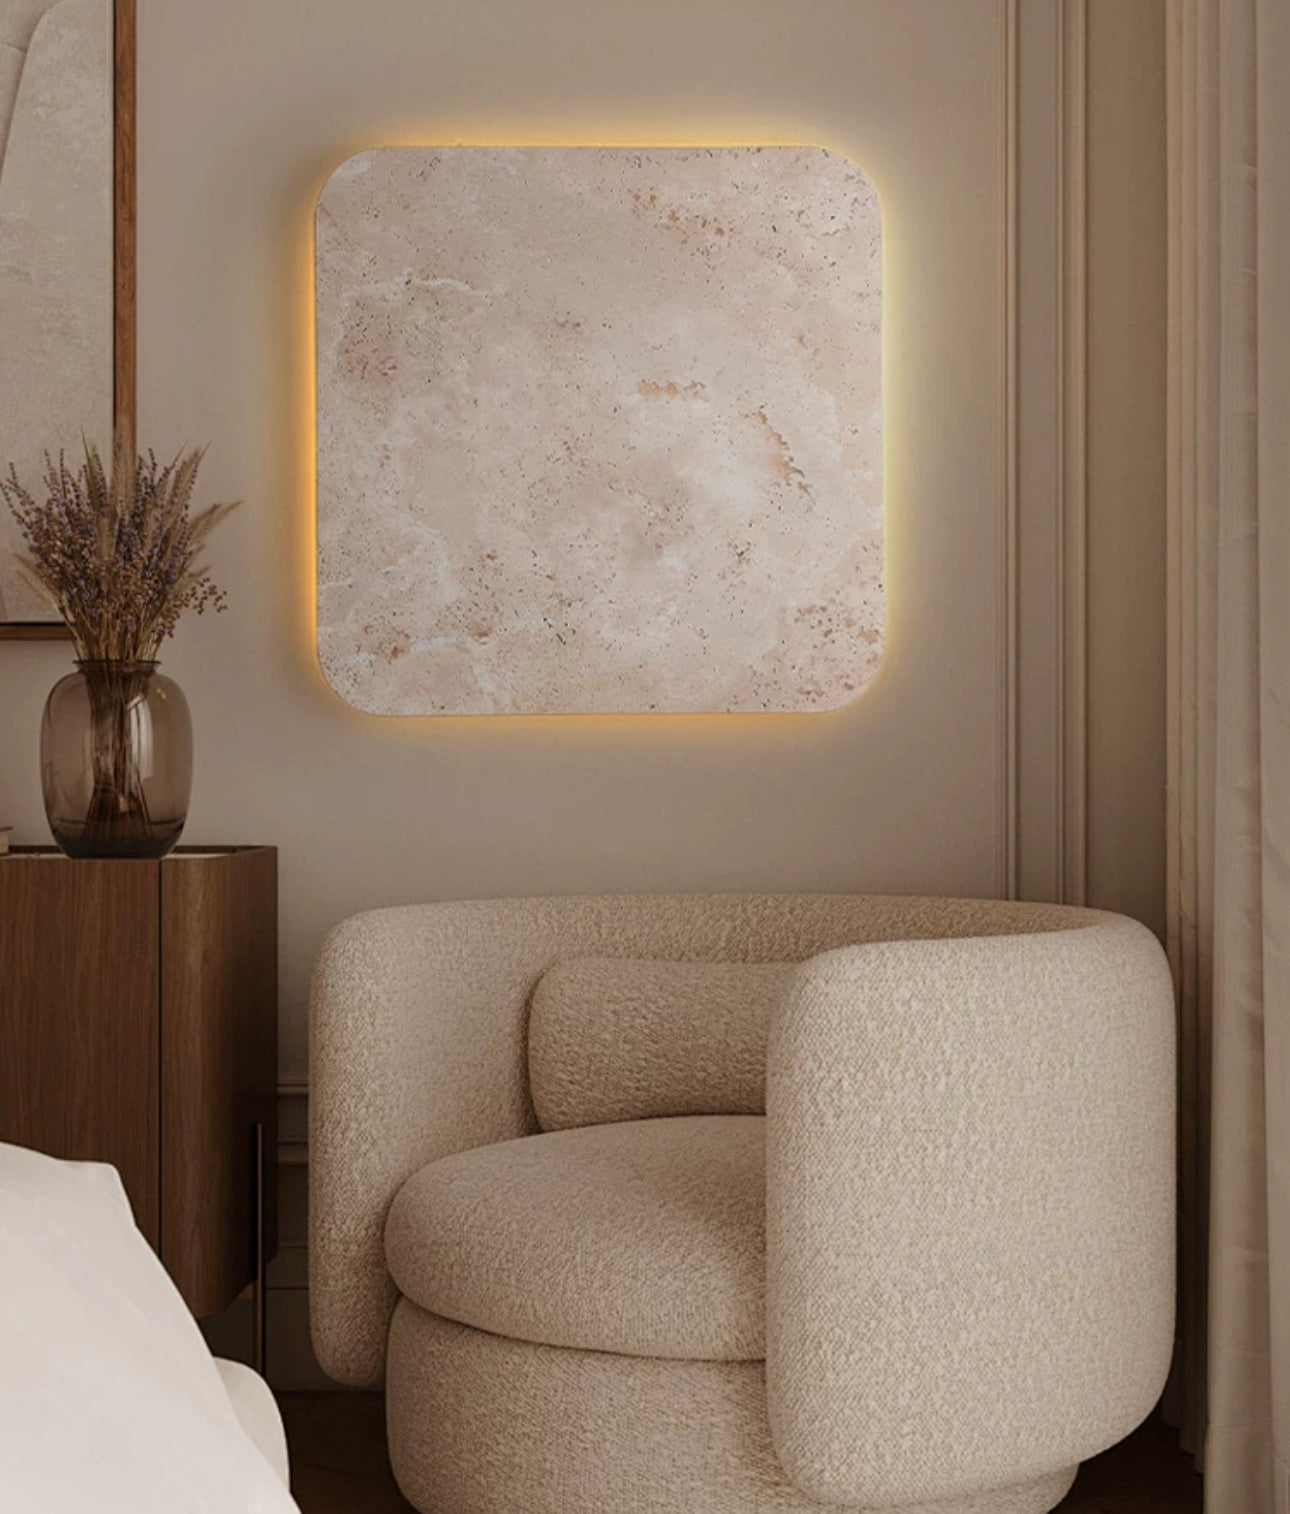 Luxurious Marble And Stone 60cm Warm Led Lighting Intelligent Control Waterproof - Minimalist Wall Lamps